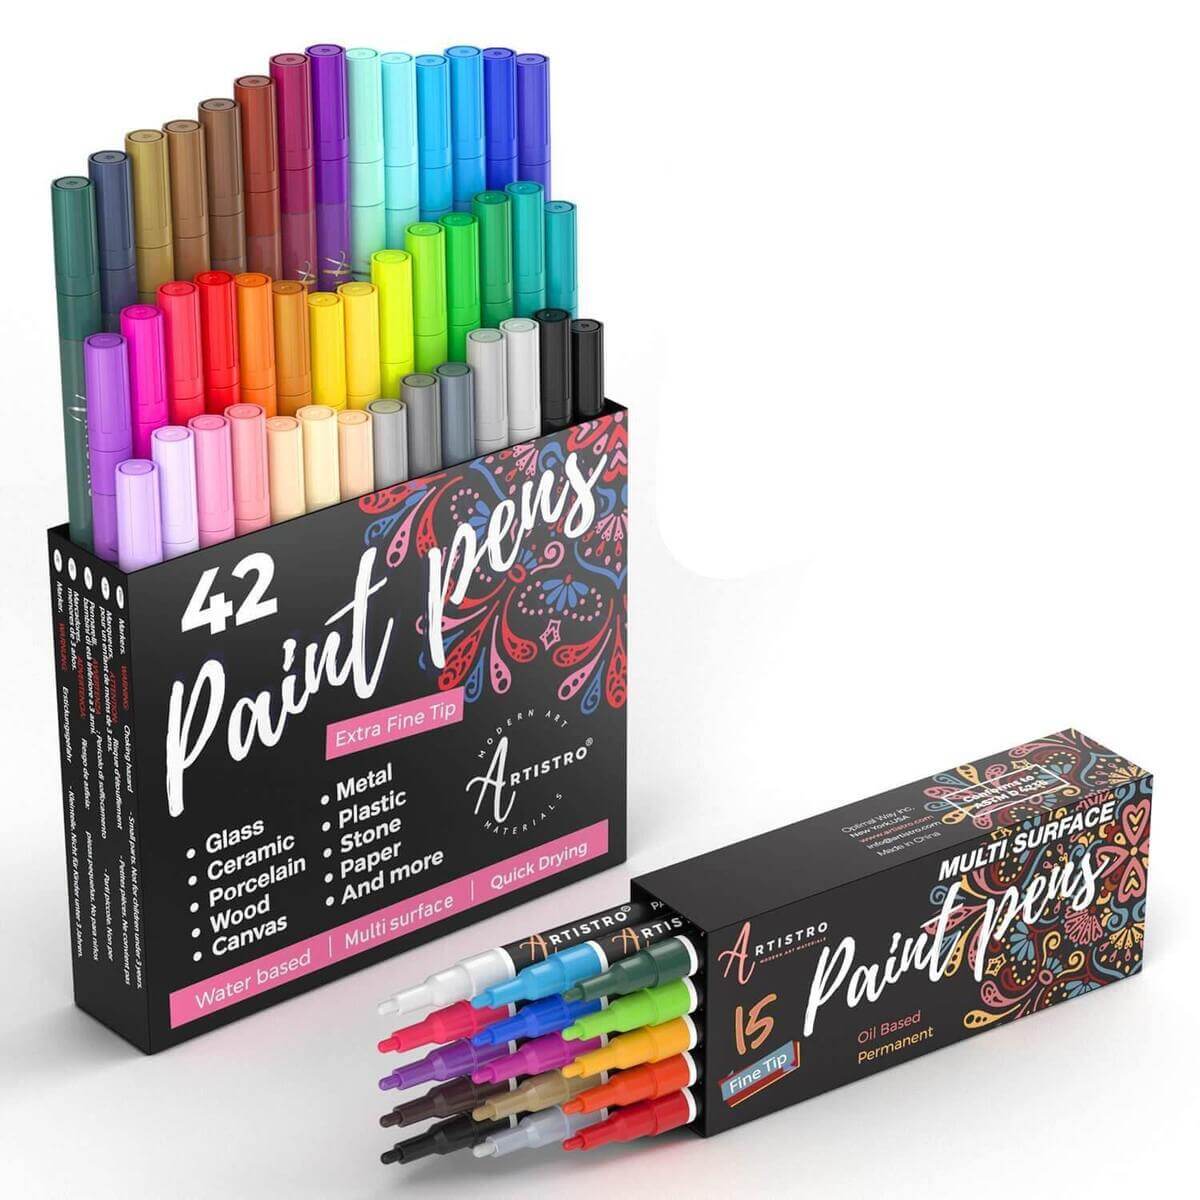 20 Pc Set Artistic Oil Based Markers Artistic Oil Based Pen Fine Tip Markers  Wood Painting Ceramic Painting Art Painting Freshie Makers 